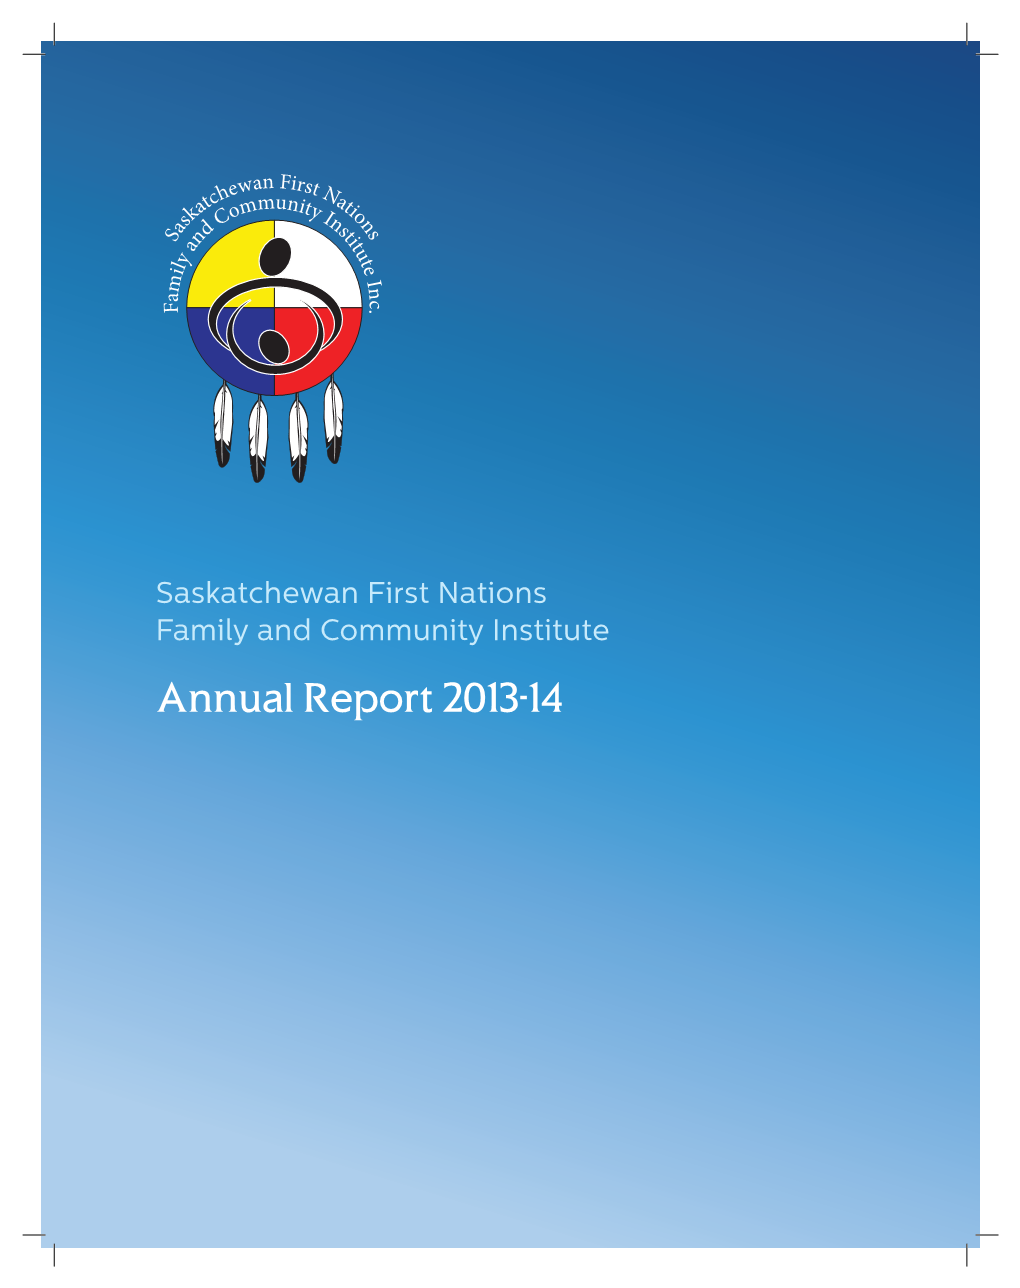 Annual Report 2013-14 Contents